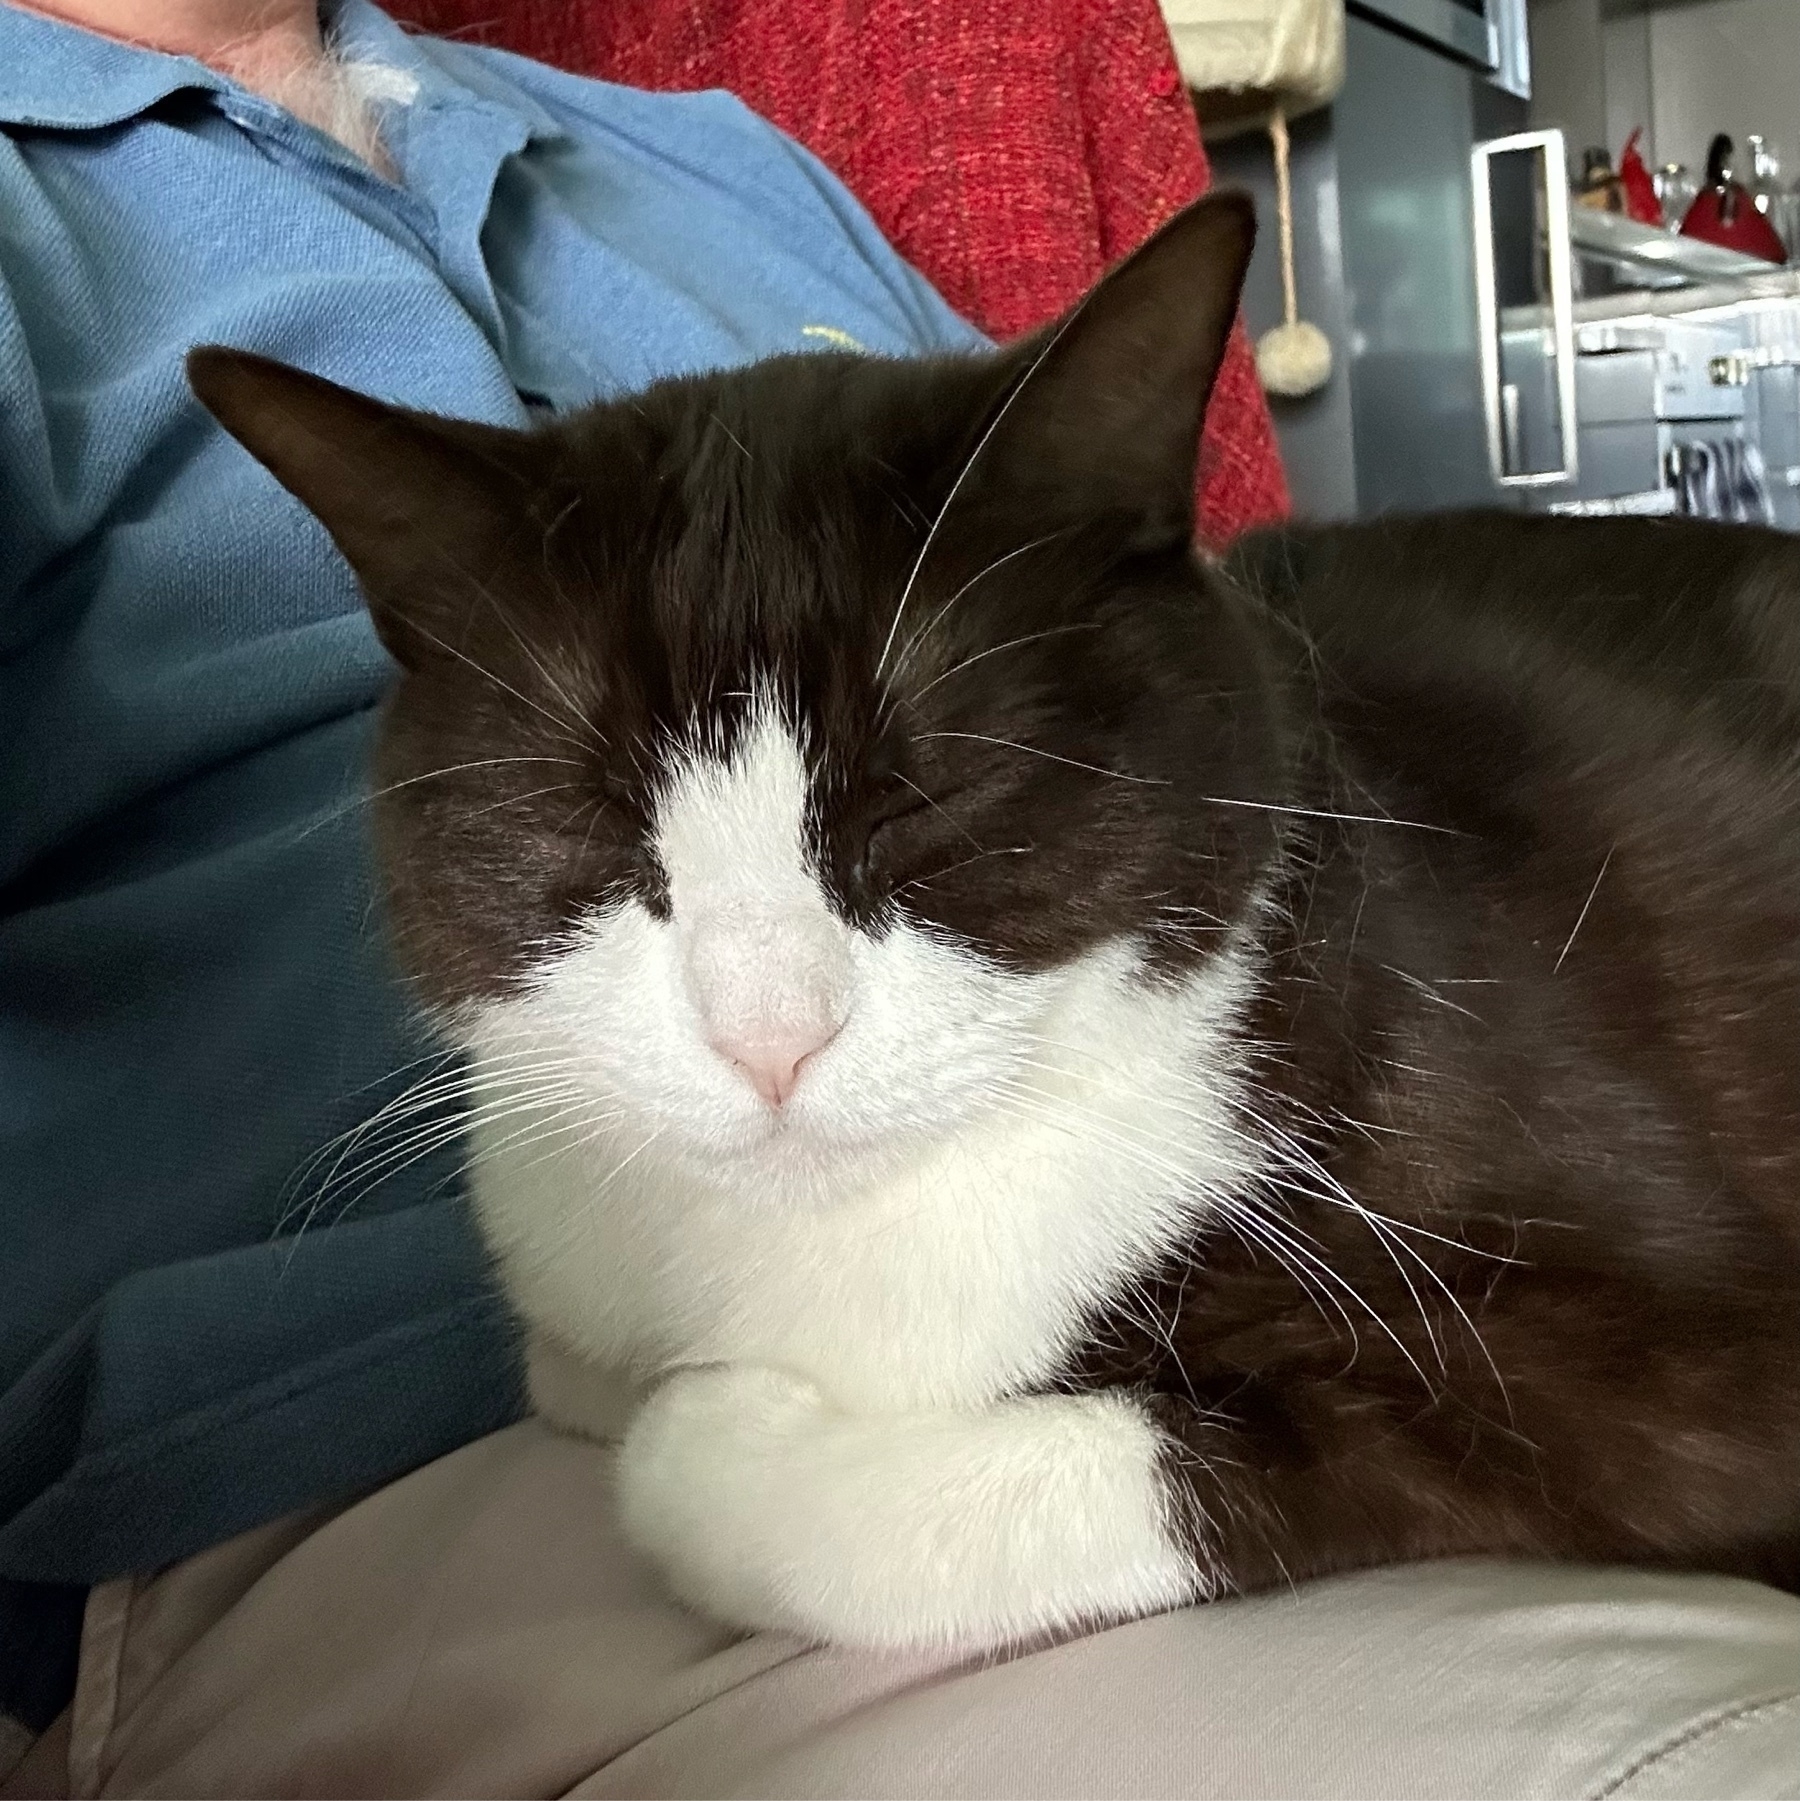 A black and white cat asleep in the lap of a man sitting in a chair. The cat has long whiskers and eyes are closed. He is wearing a blue shirt and light shorts. 